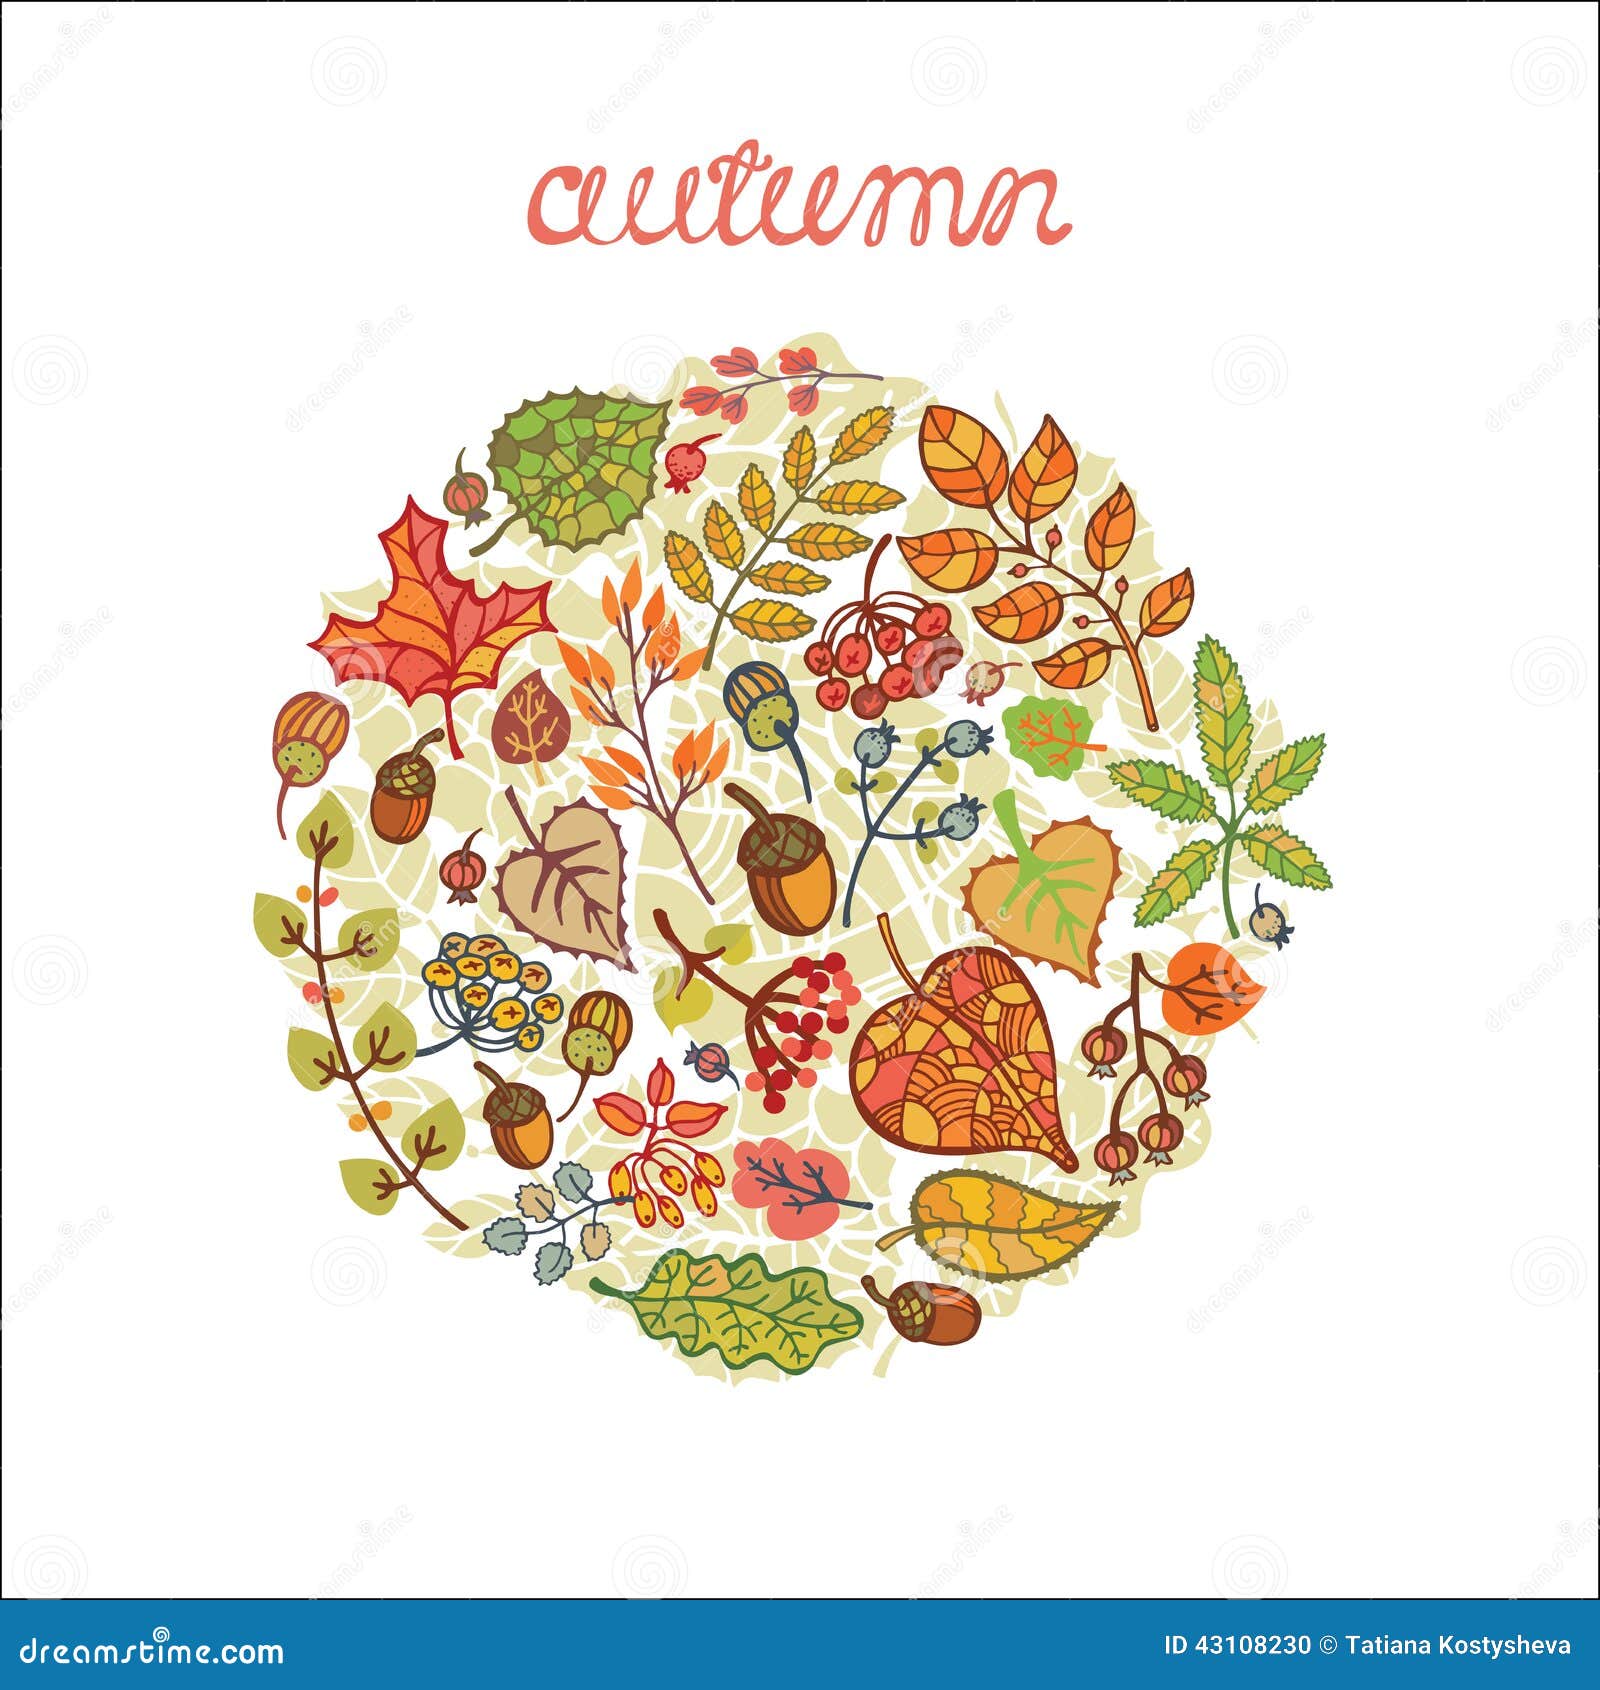 autumn leaves in the round composition